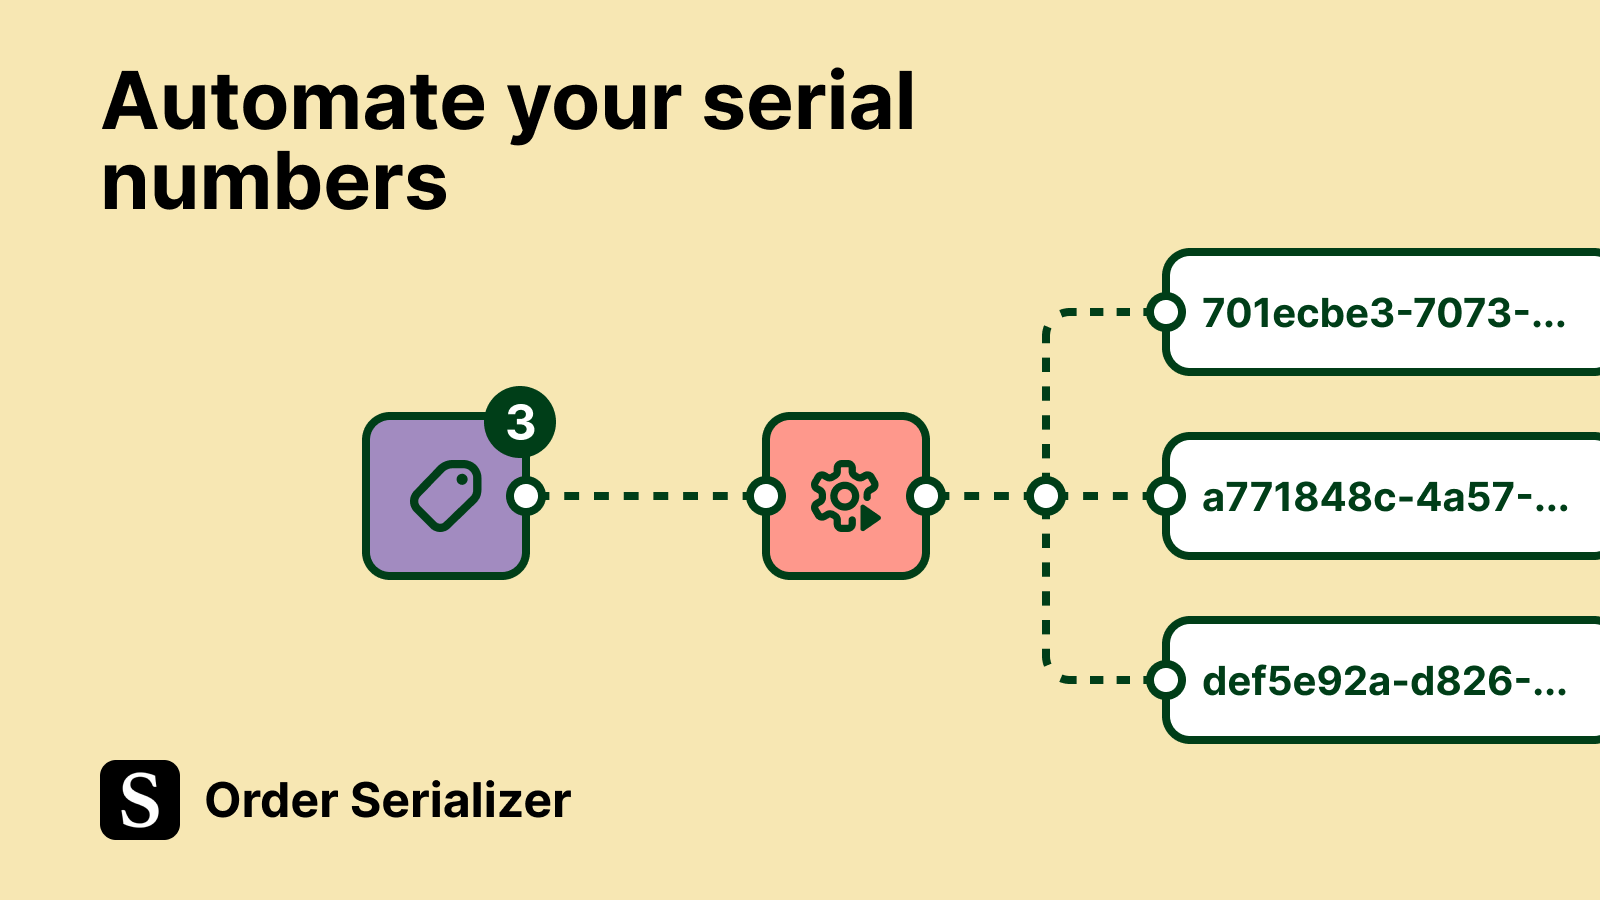 Automate serial numbers